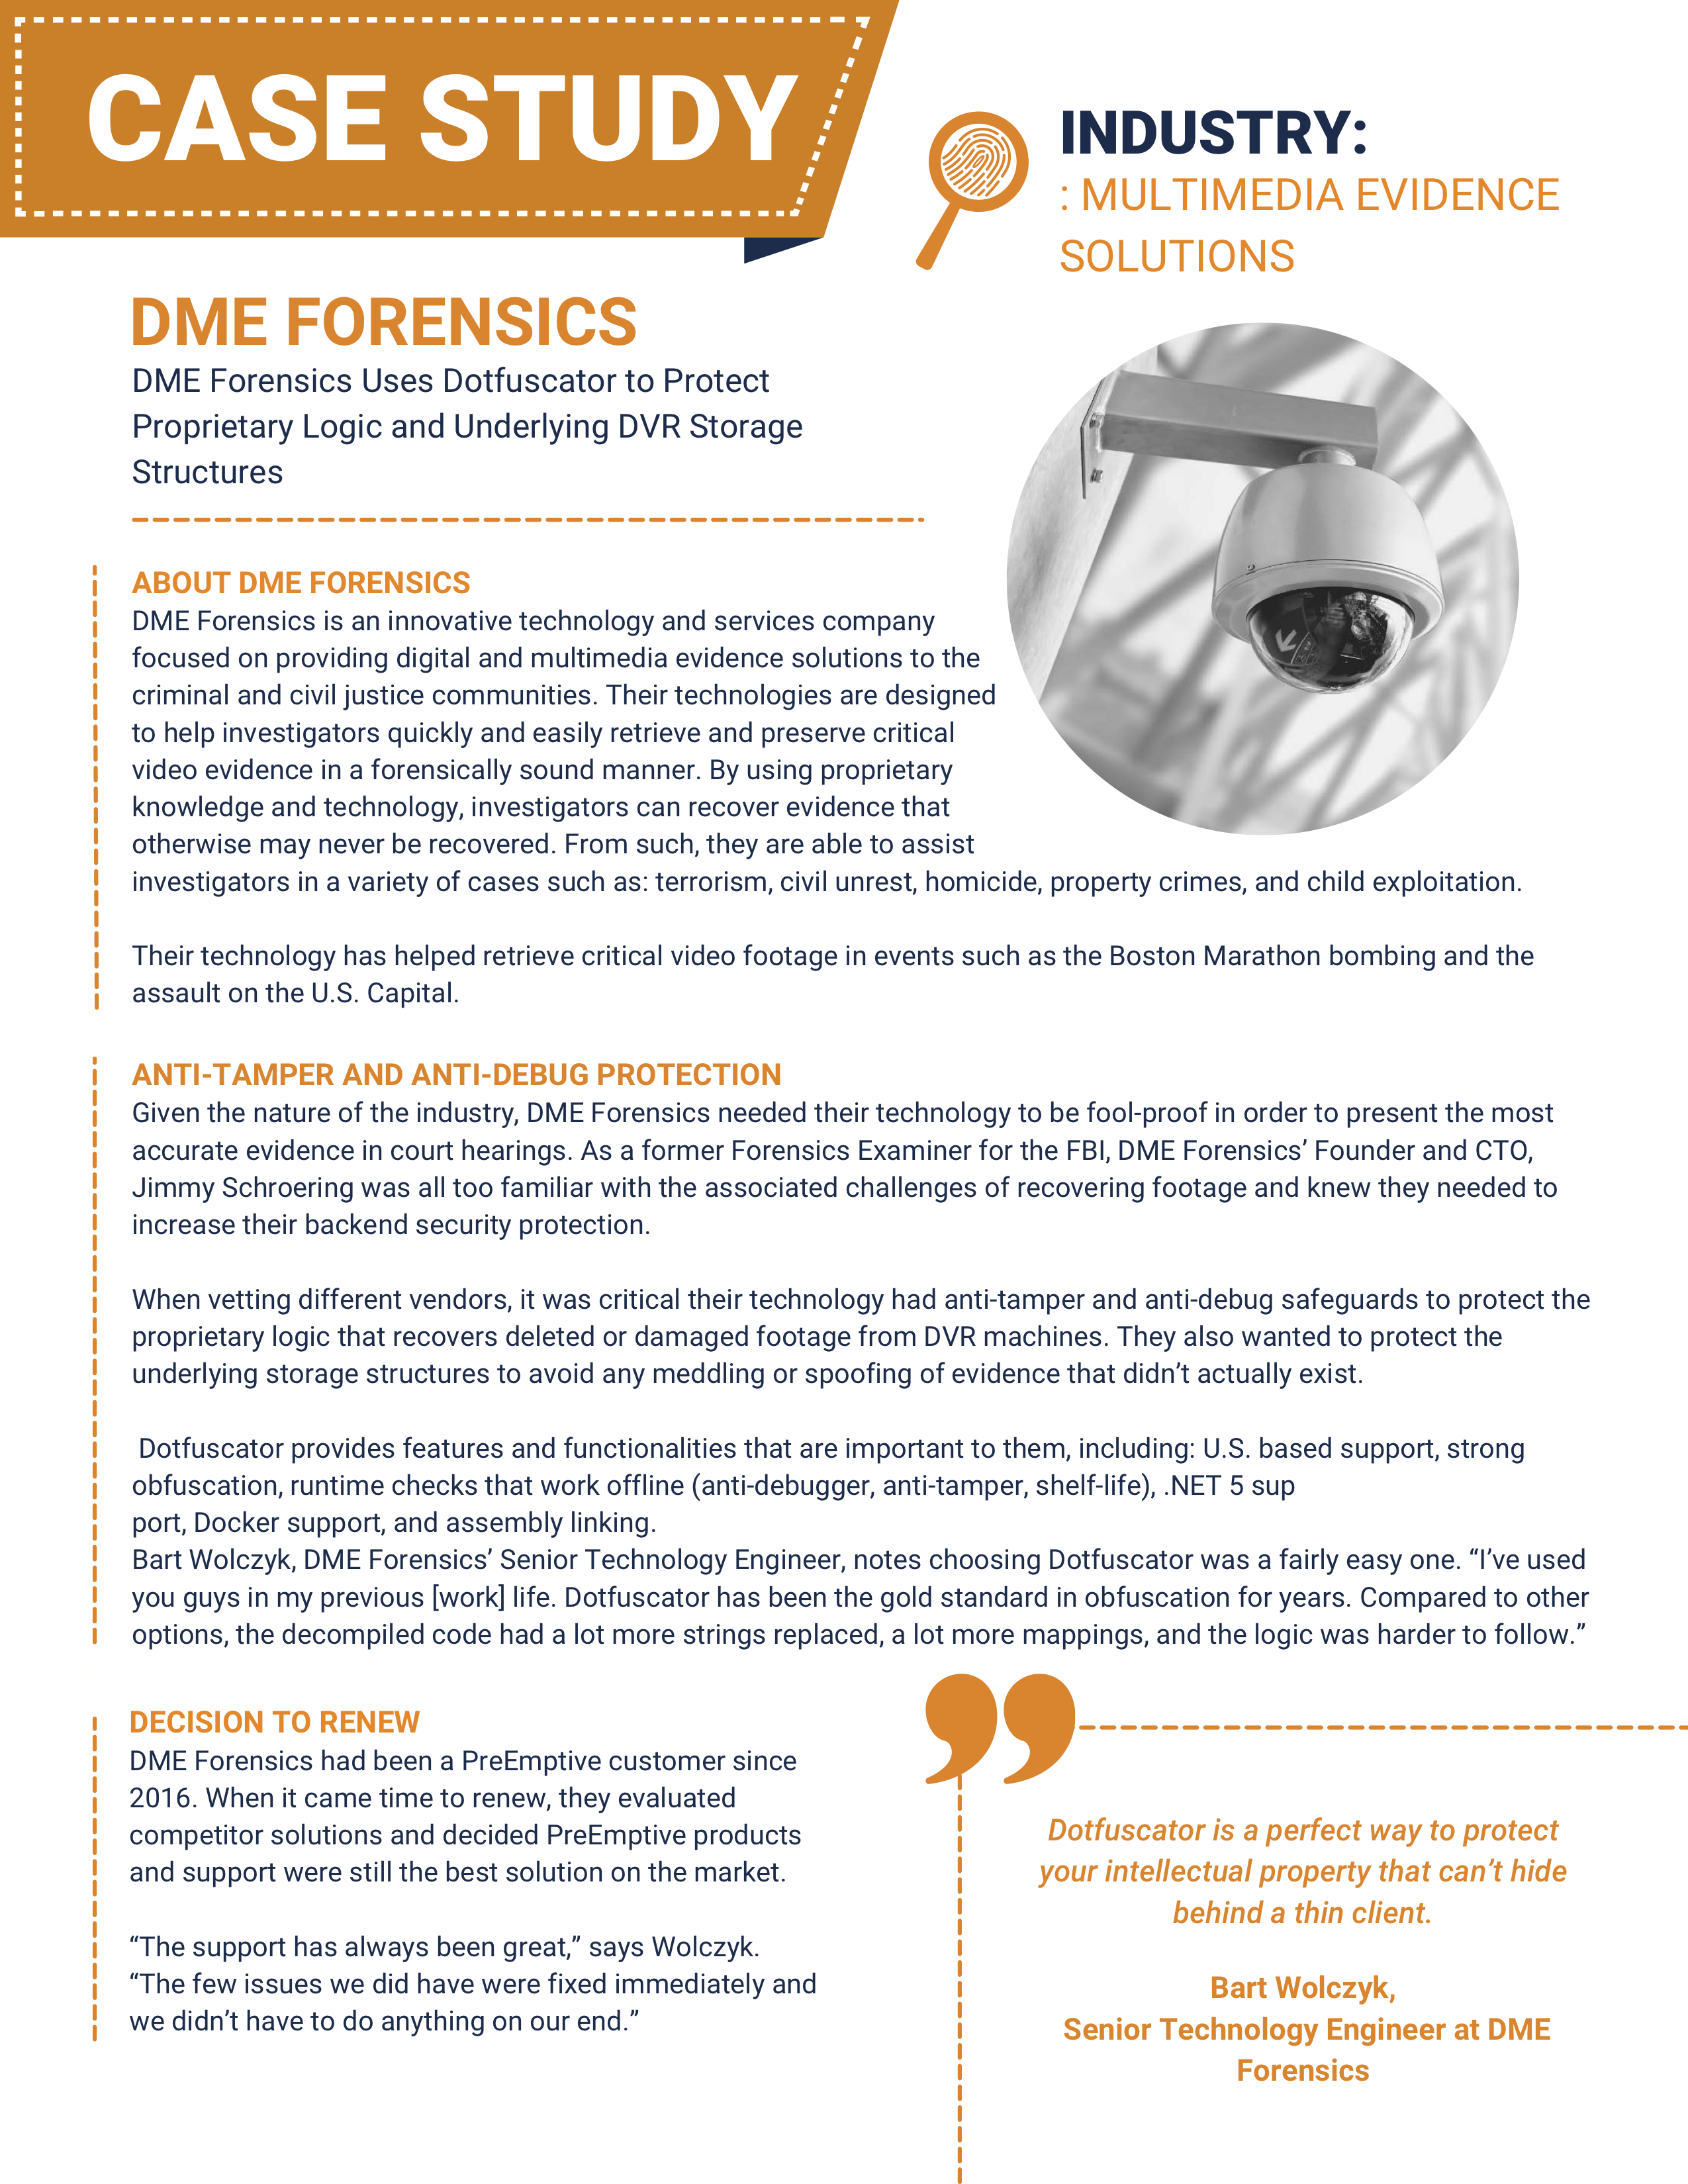 DME Forensics Case Study example image